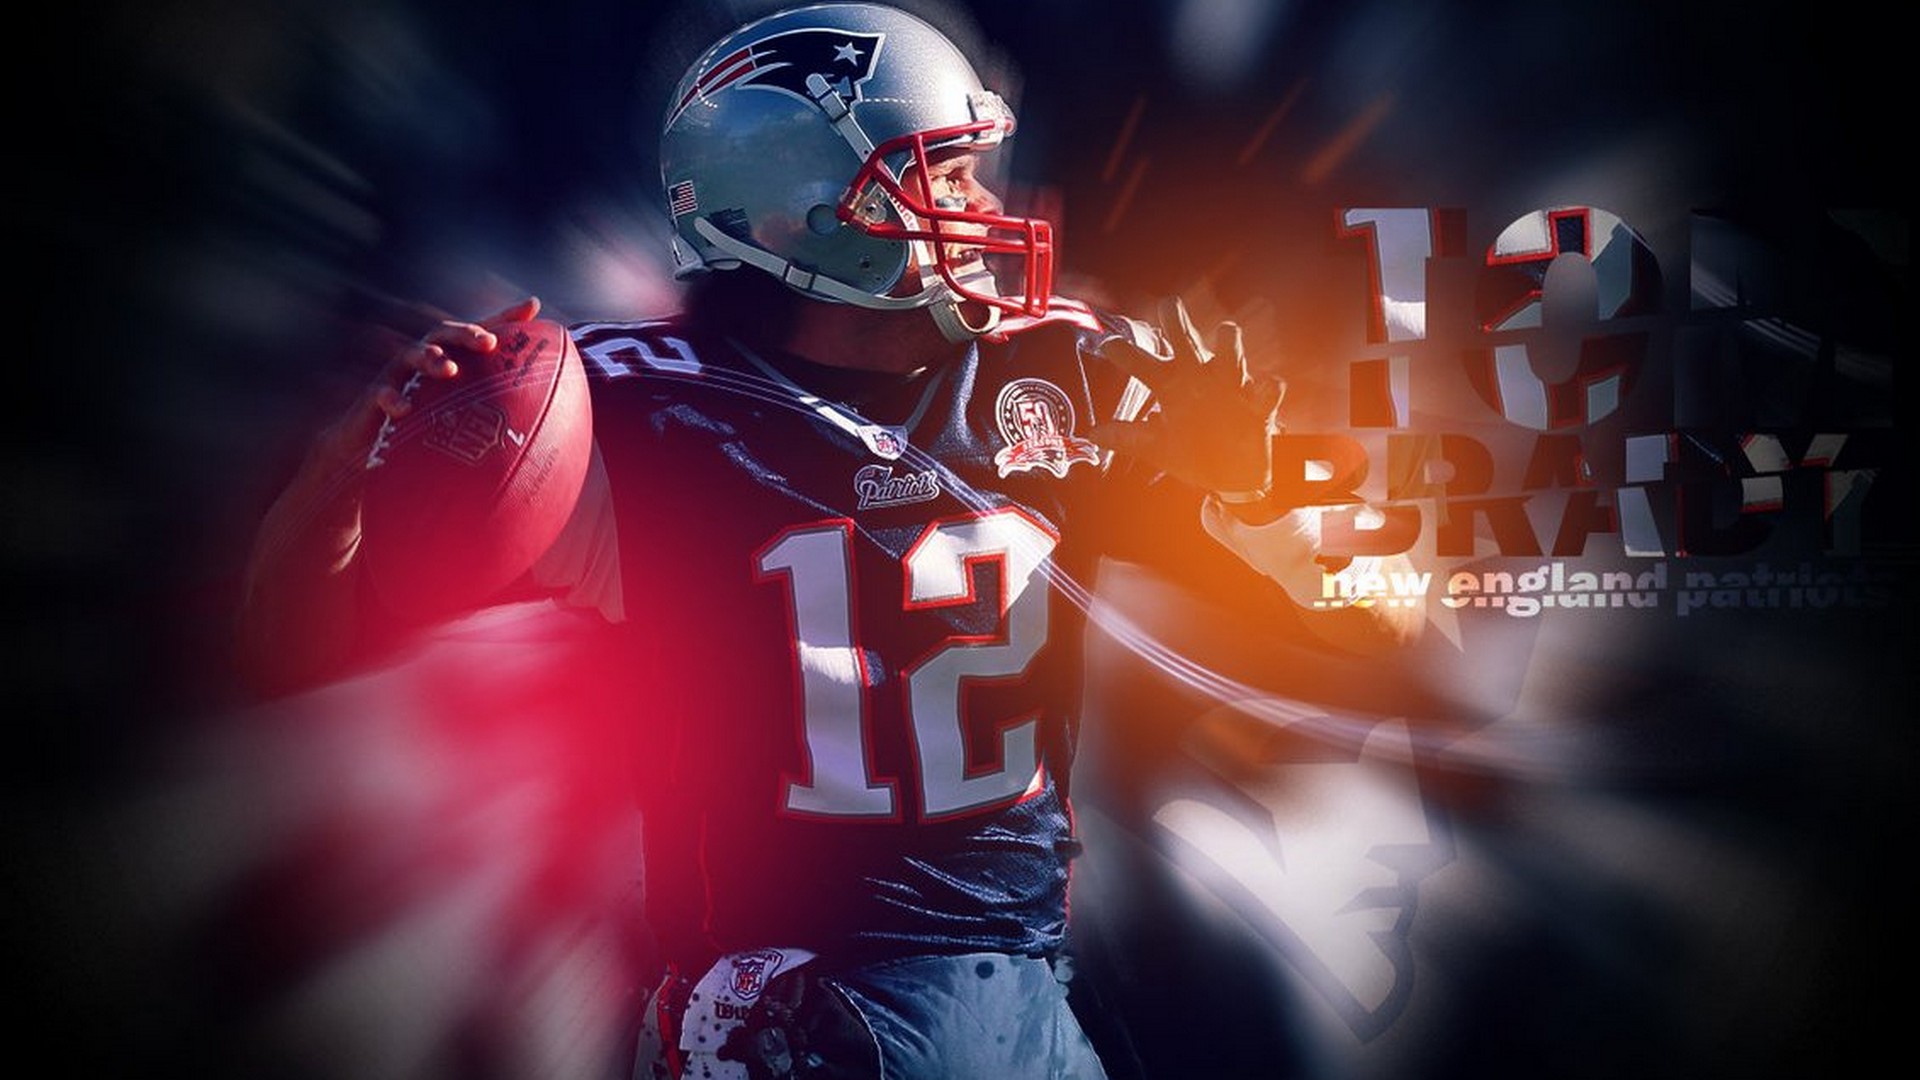 Wallpaper Tom Brady Patriots with resolution 1920X1080 pixel. You can use this wallpaper as background for your desktop Computer Screensavers, Android or iPhone smartphones